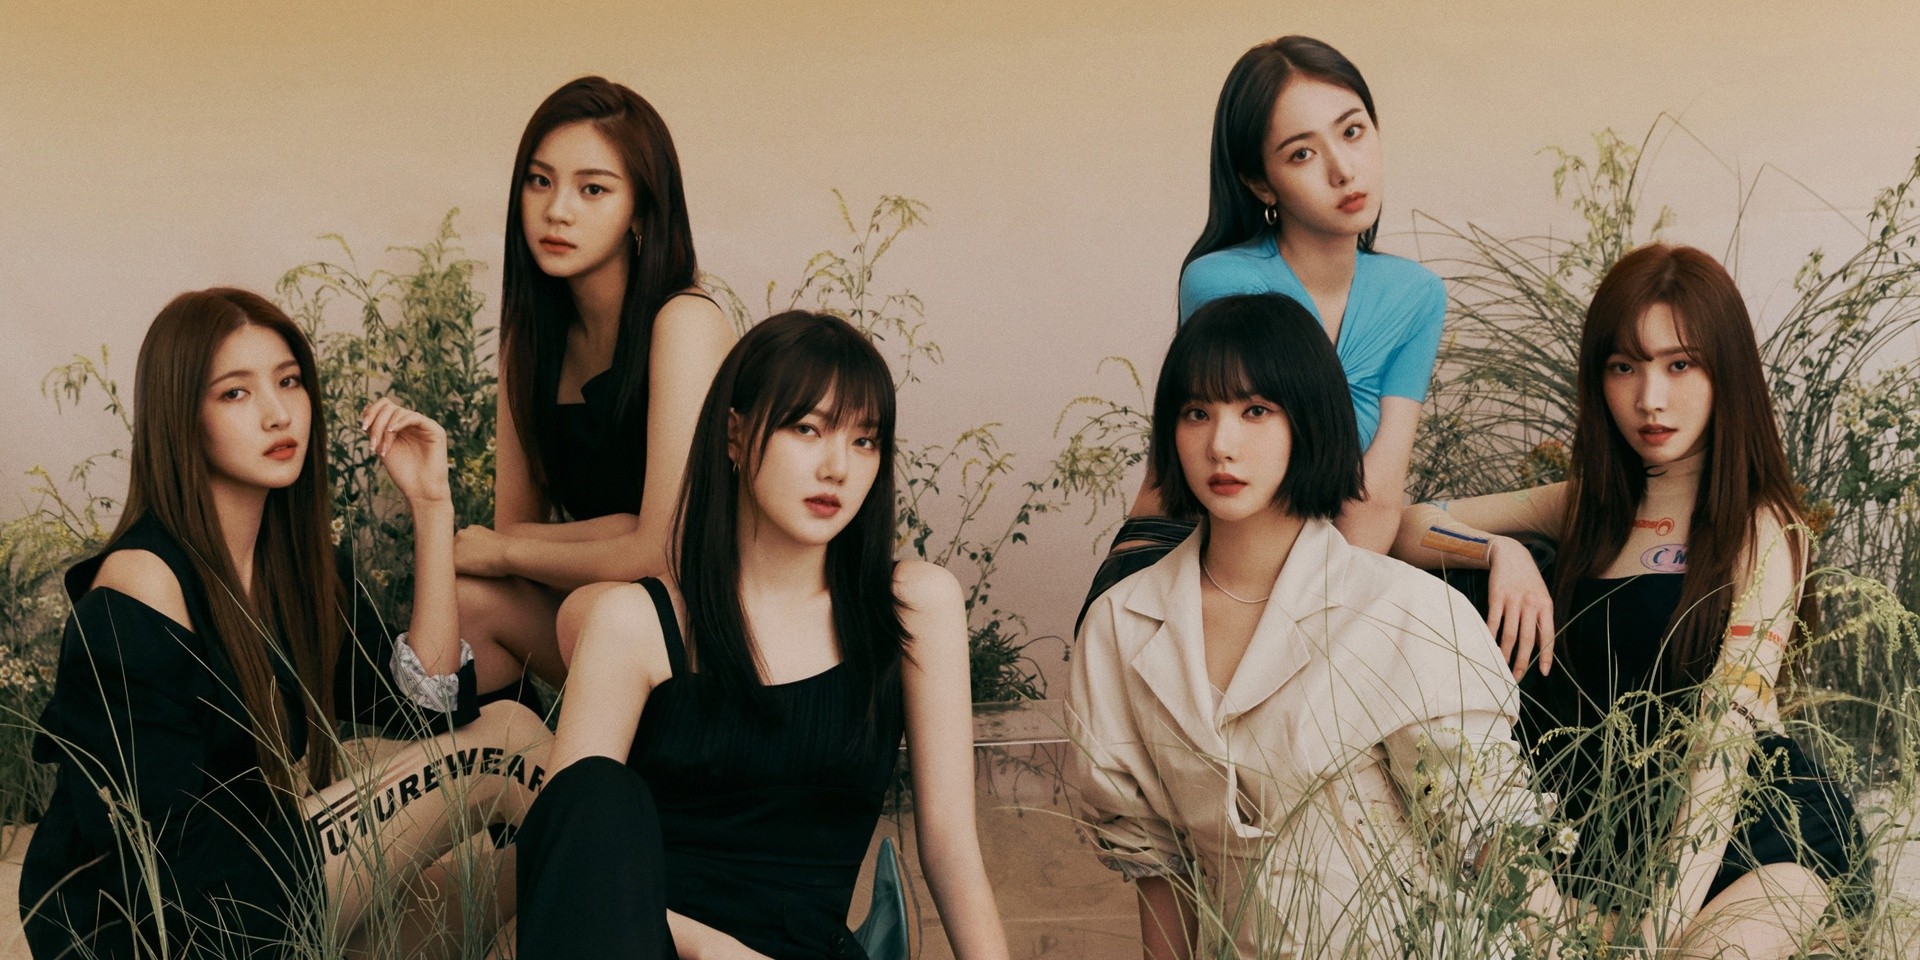 GFRIEND comfort fans with handwritten letters as they end contract with Source Music, fans show support and appreciation with #ThankYouGFriend